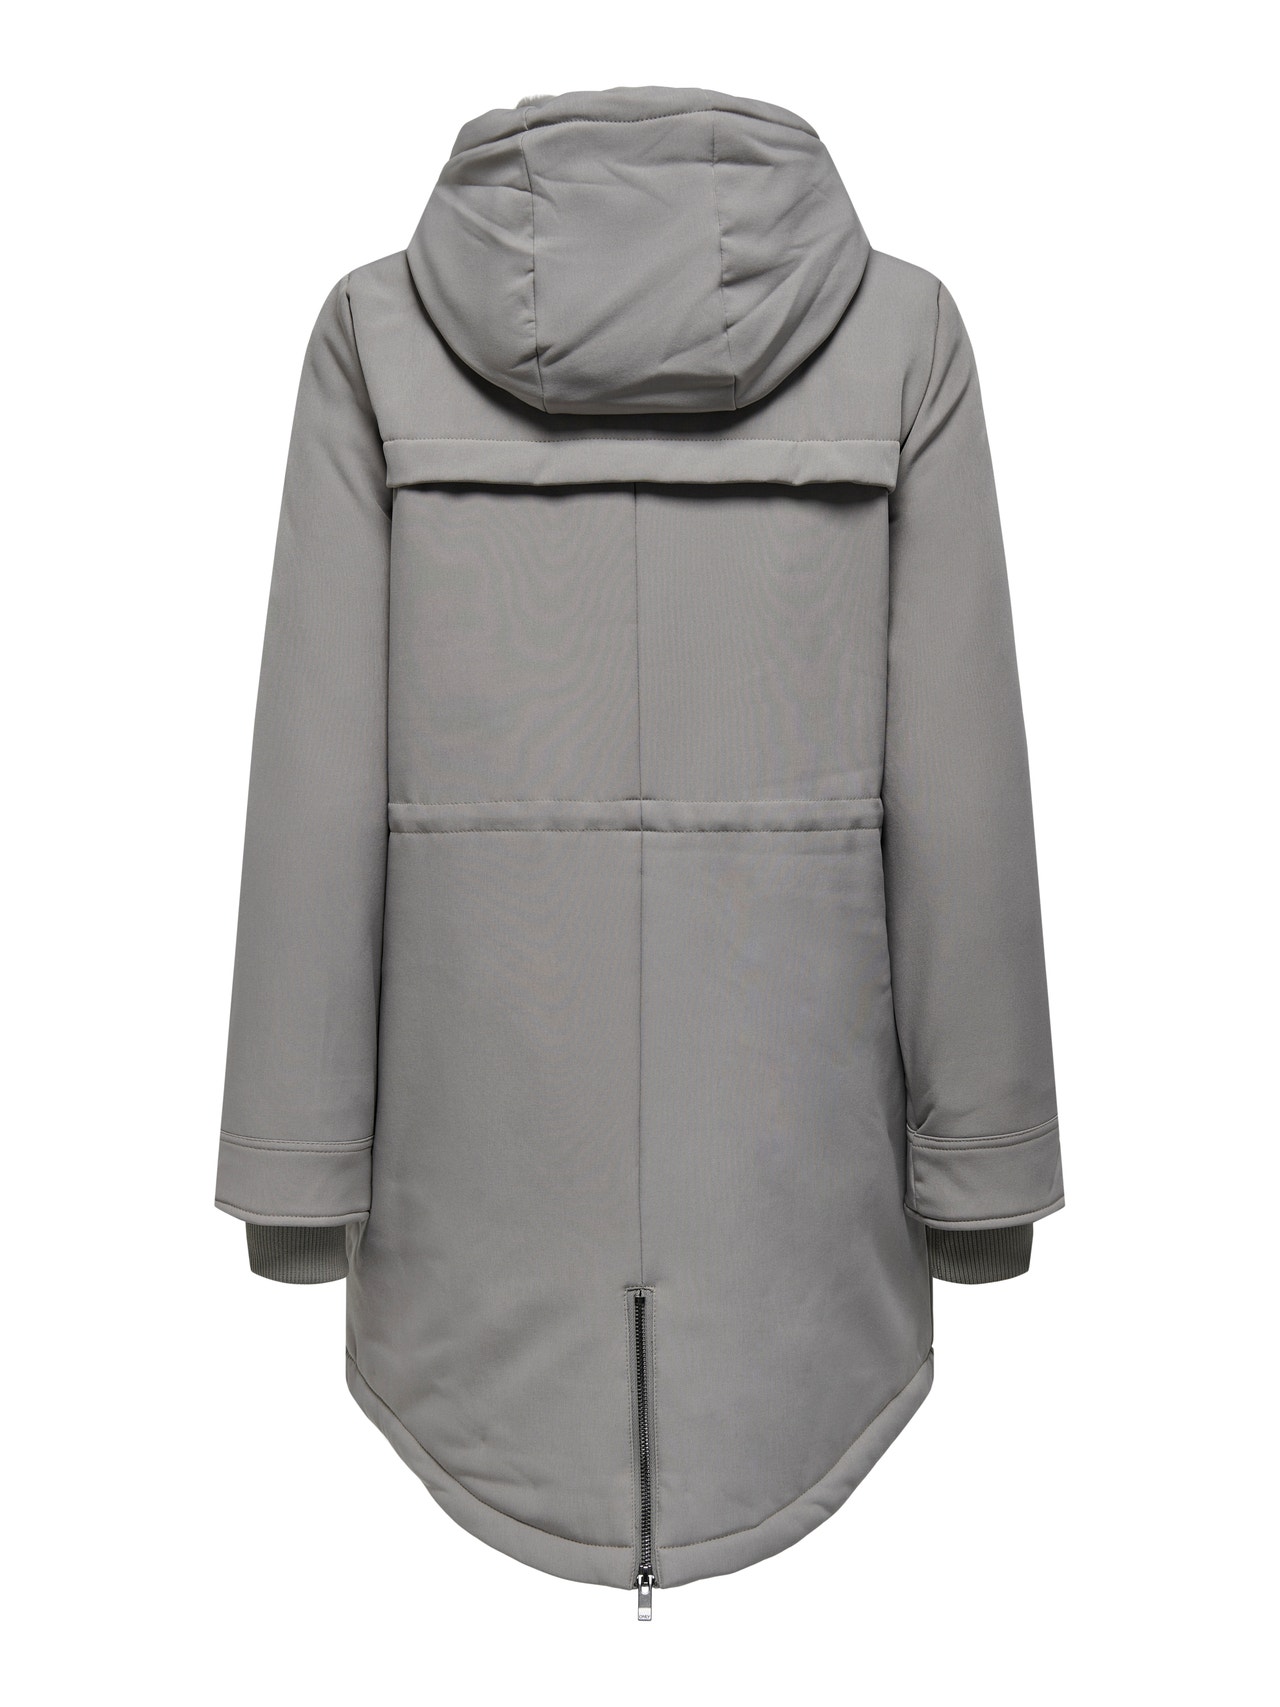 ONLY Long jacket with pockets -Steeple Gray - 15192522